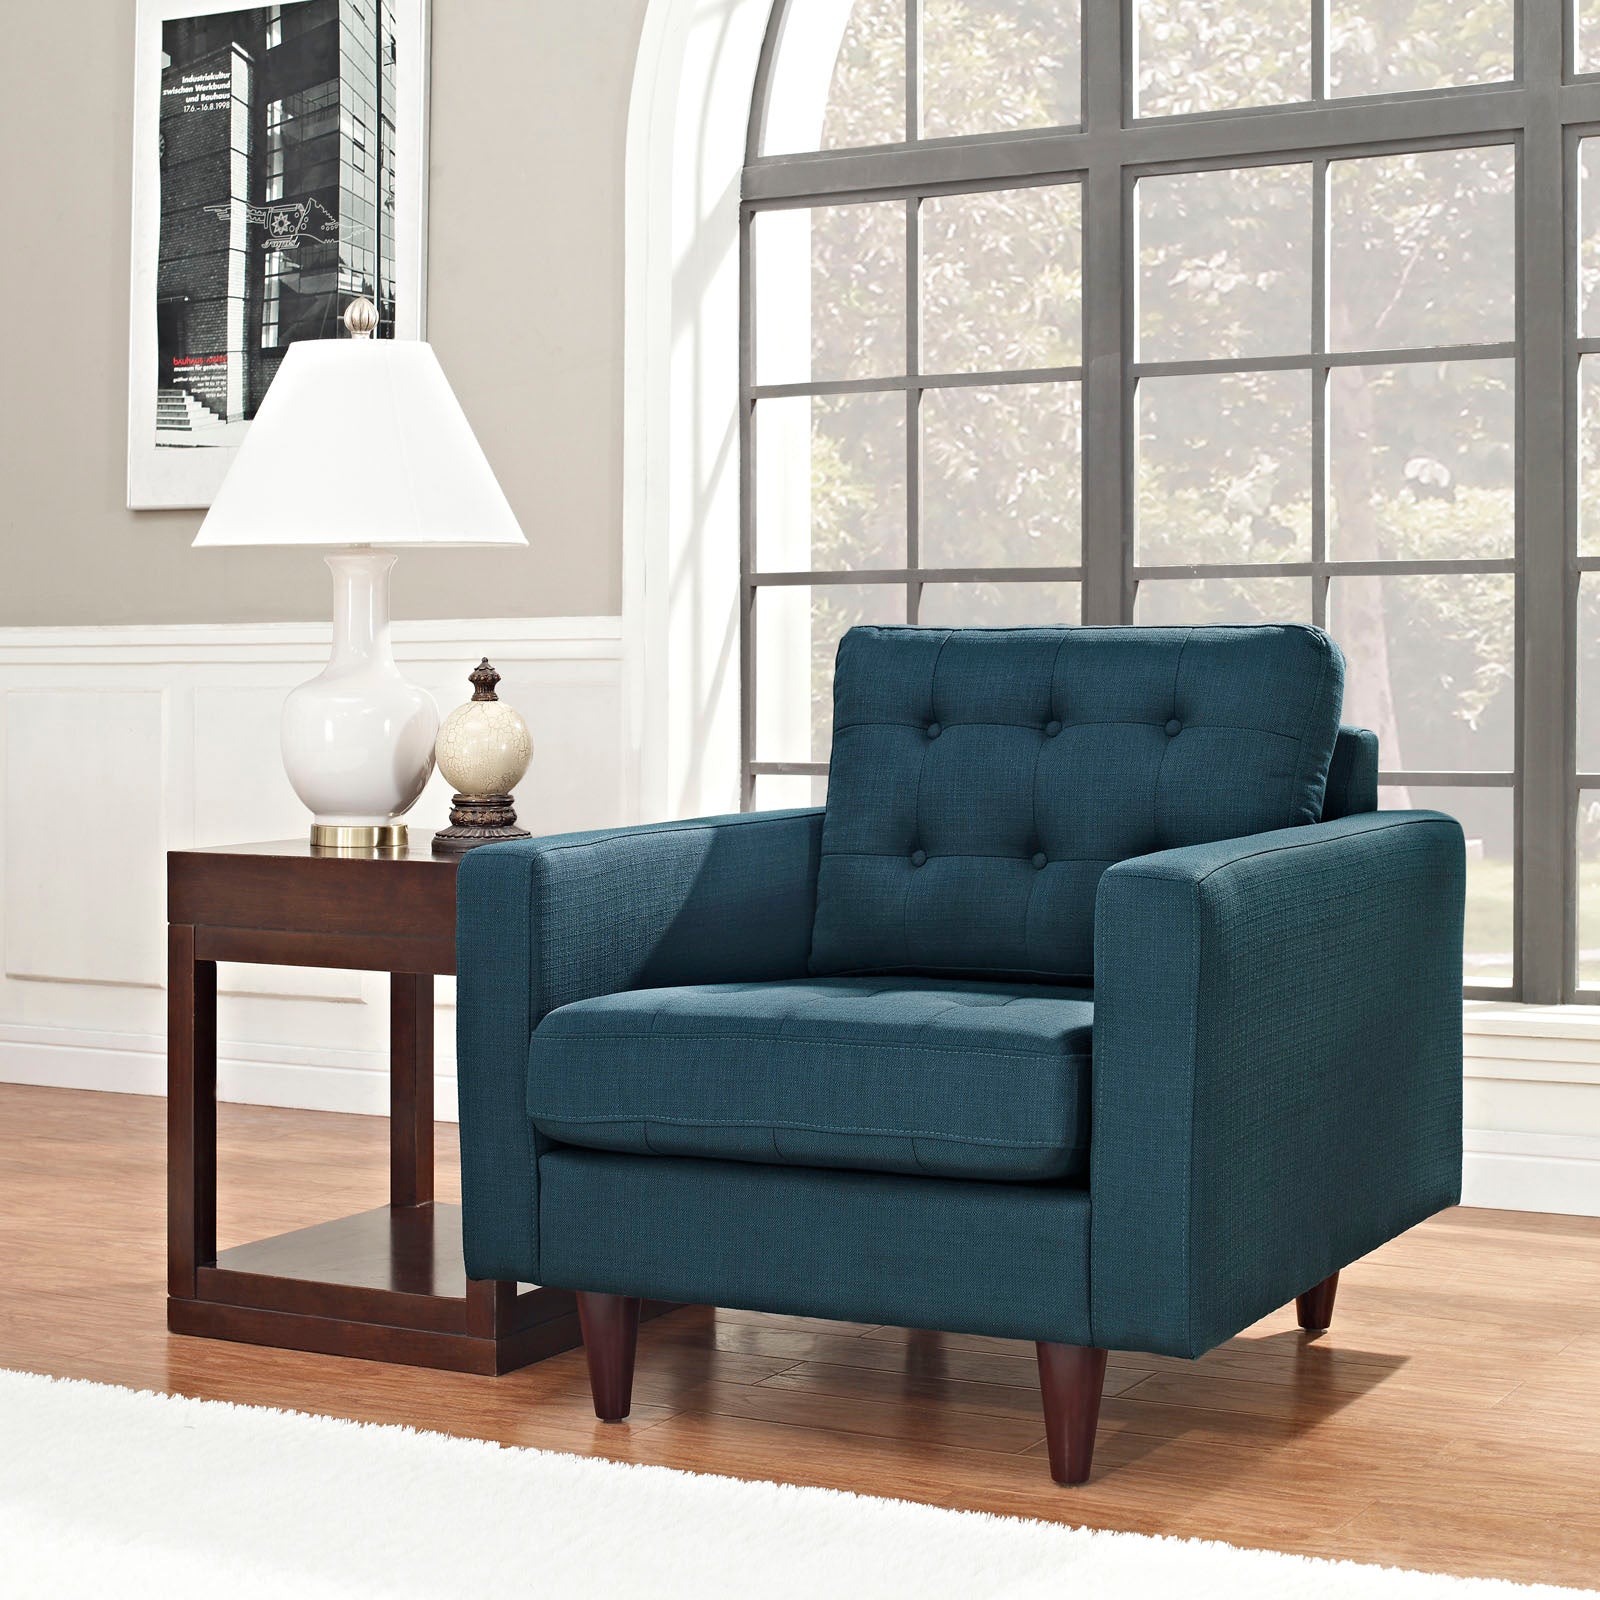 Empress Upholstered Fabric Armchair - East Shore Modern Home Furnishings